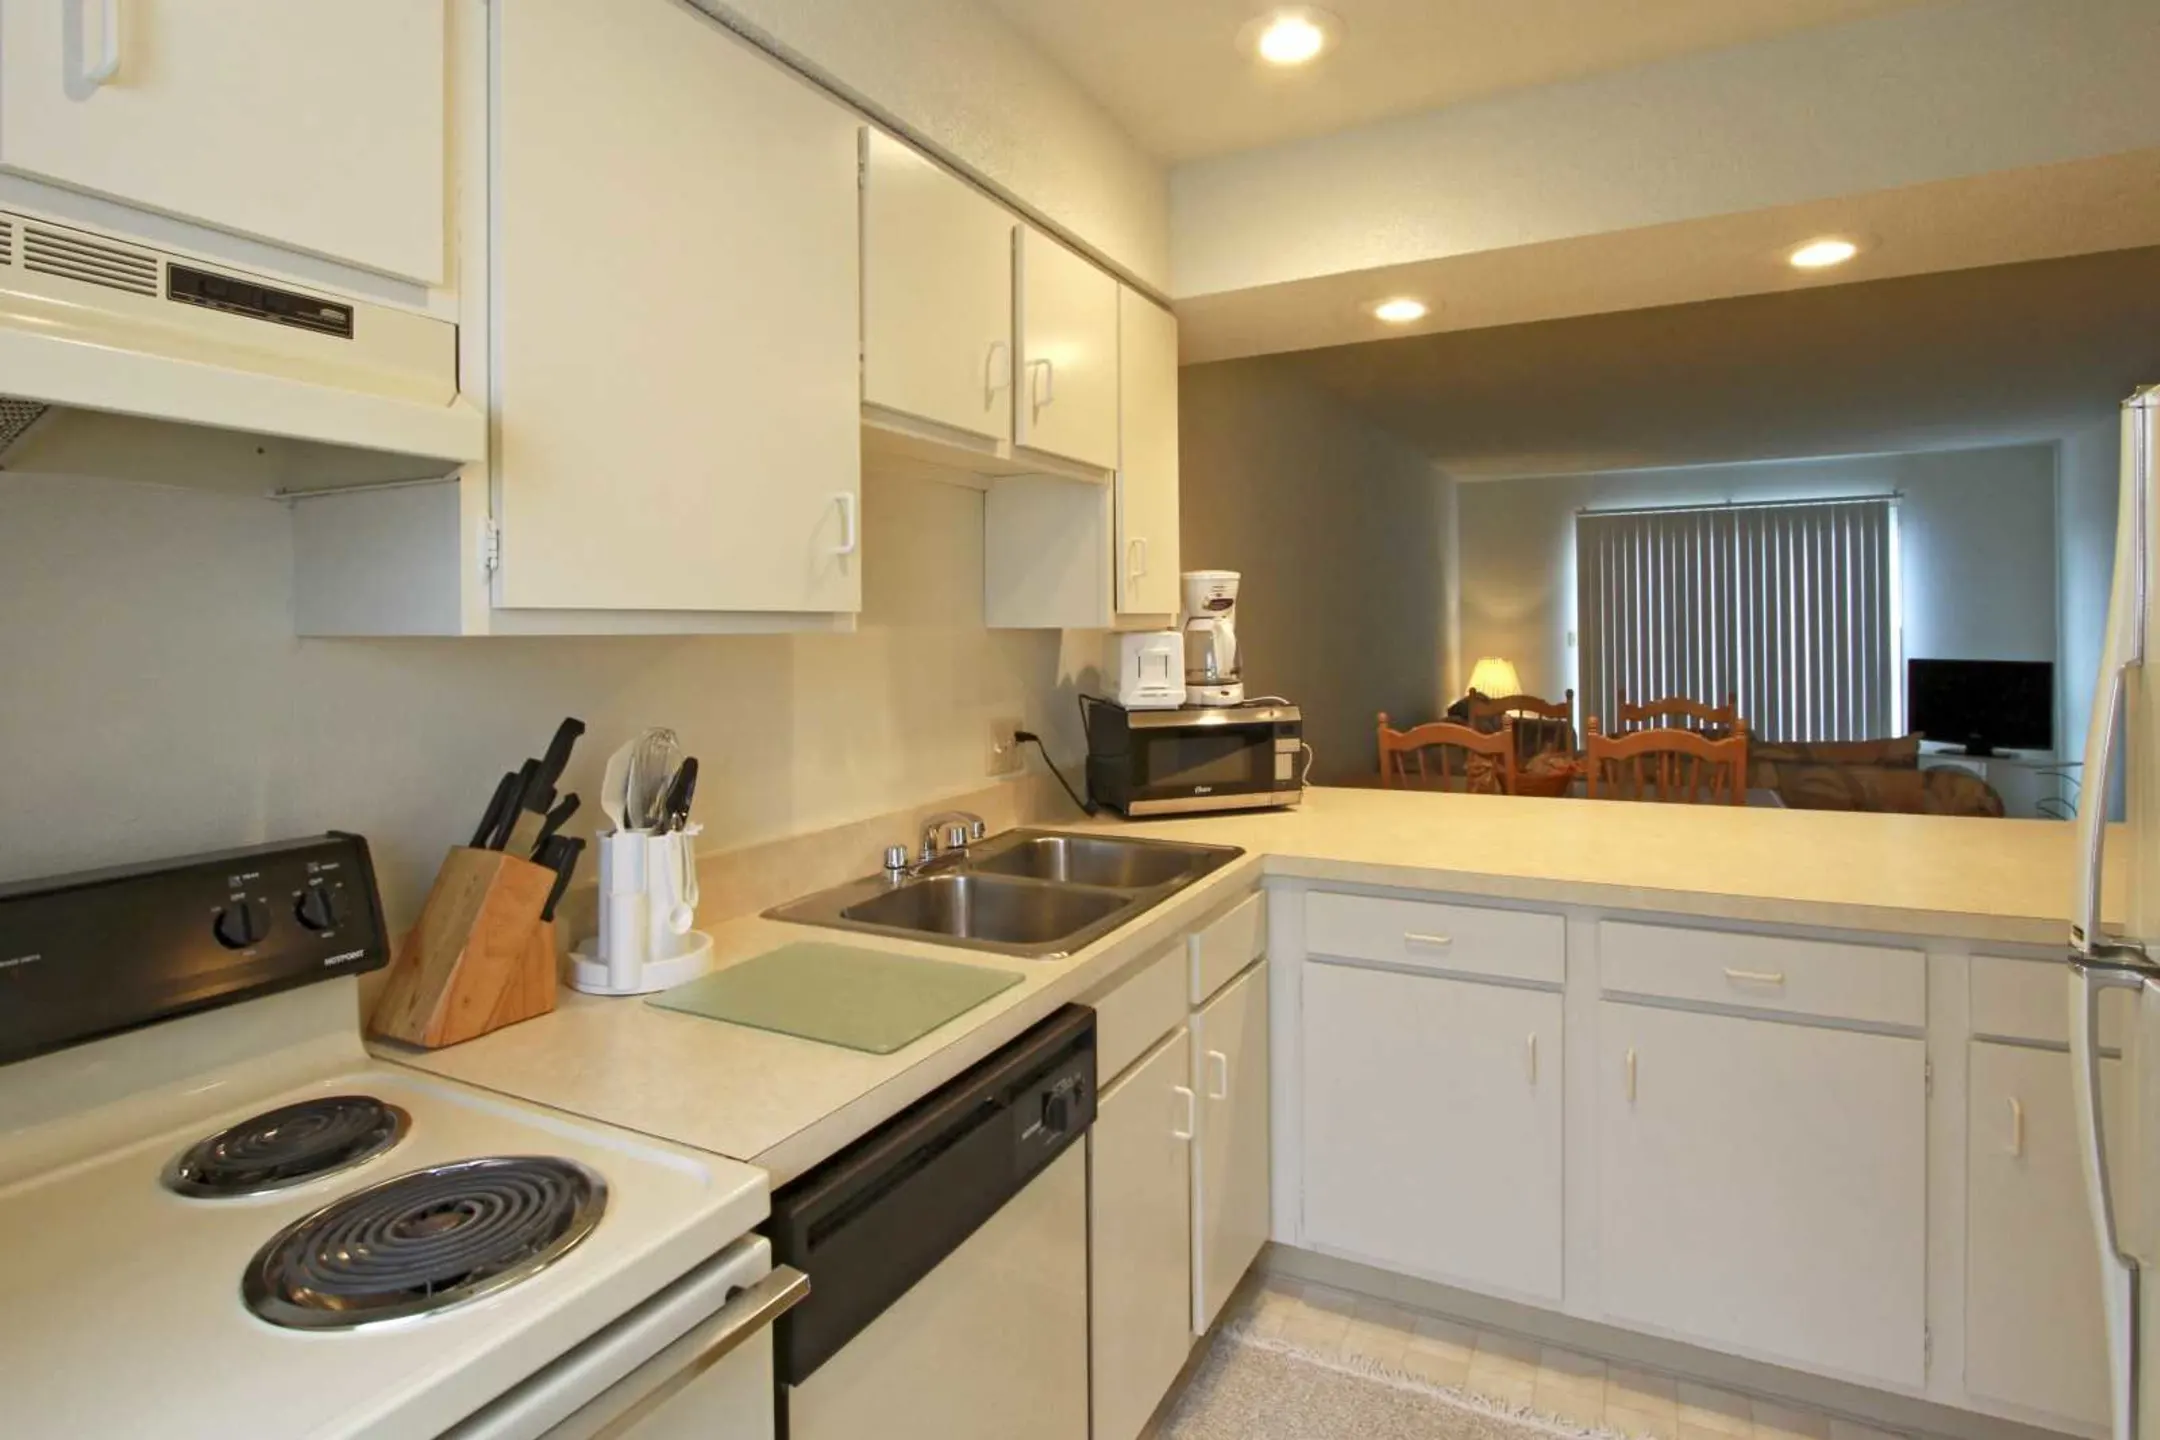 Kitchen - Colonial Gardens & Cherbourg Apartments - Overland Park, KS